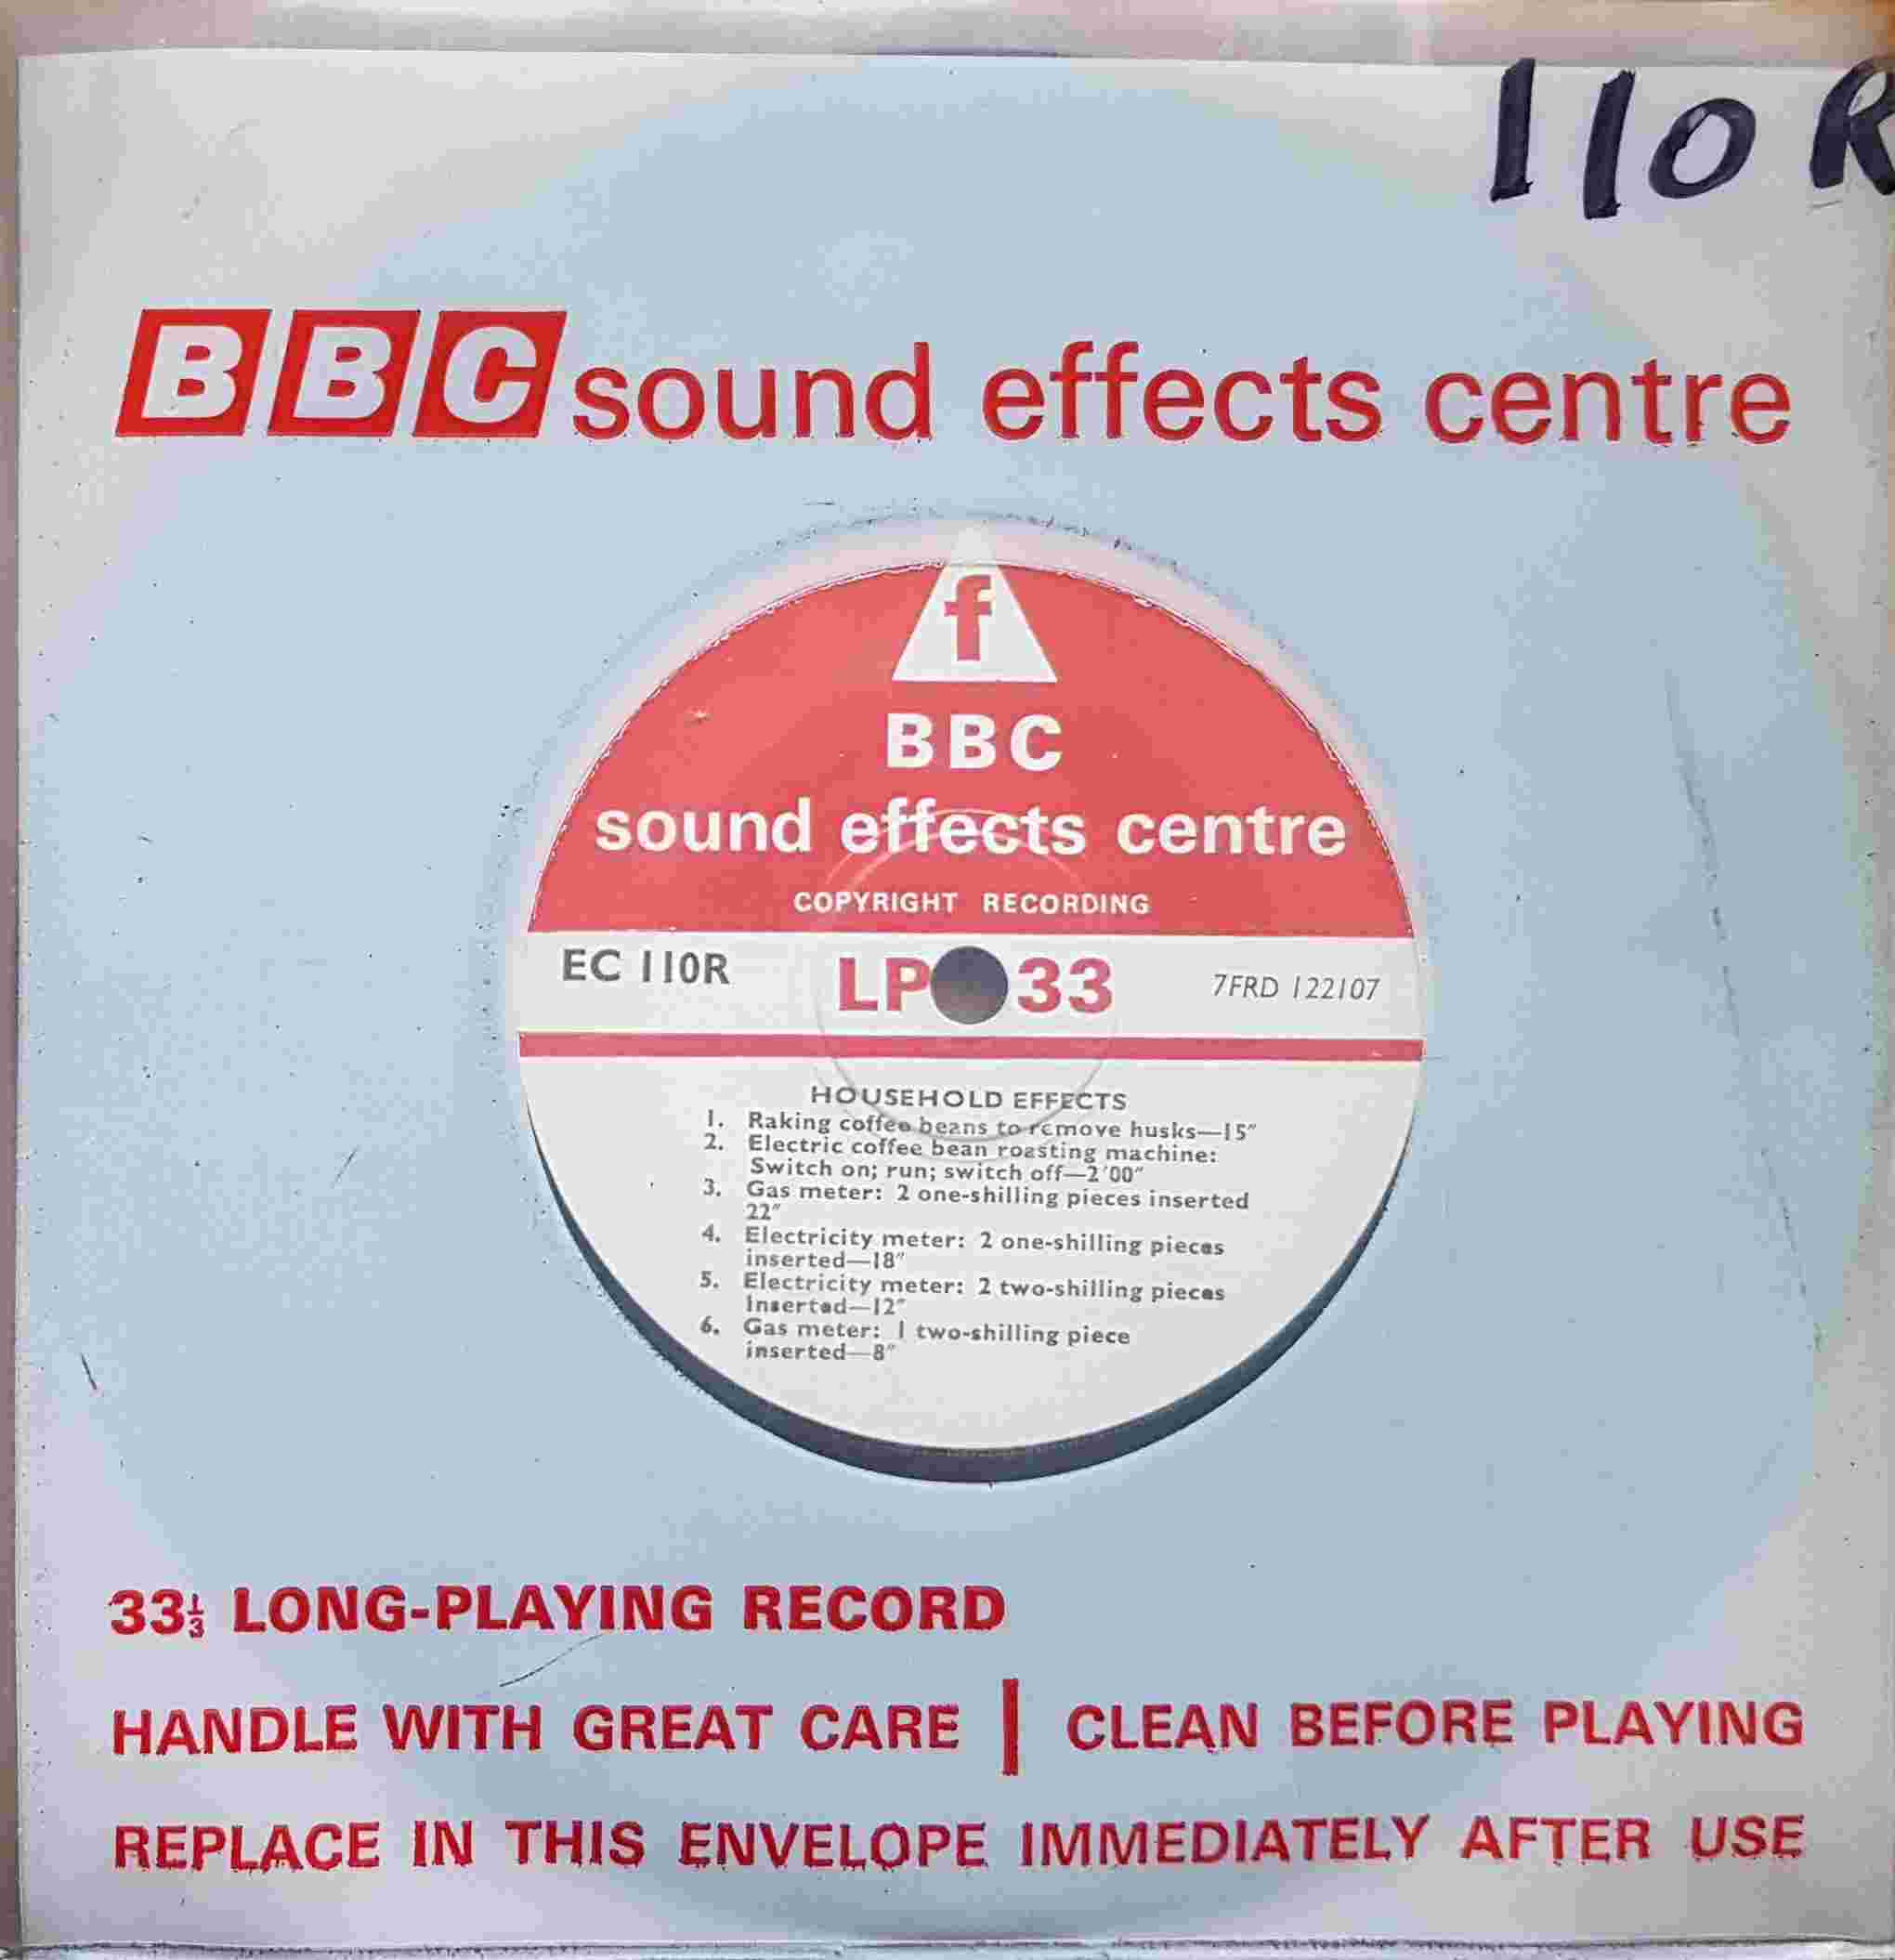 Picture of EC 110R Household effects by artist Not registered from the BBC singles - Records and Tapes library